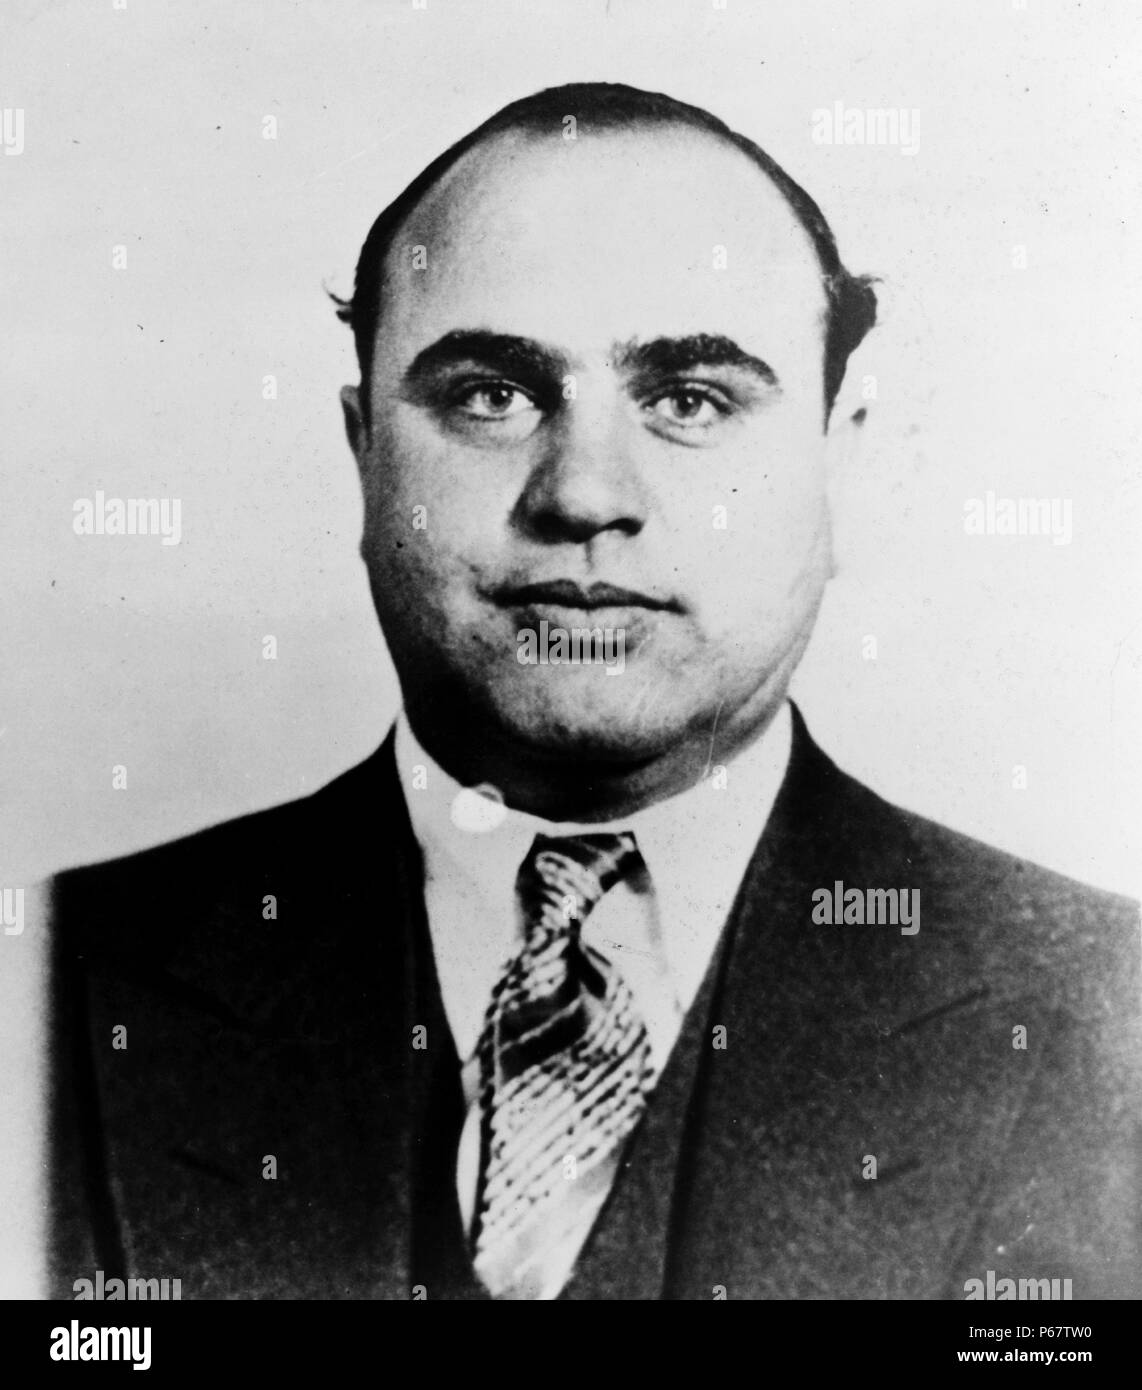 Mugshot of Al Capone. Alphonse Gabriel 'Al' Capone was an American gangster who led a Prohibition-era crime syndicate. The Chicago Outfit, which subsequently also became known as the 'Capones', was dedicated to smuggling and bootlegging liquor, and other illegal activities, such as prostitution, in Chicago from the early 1920s to 1931. Stock Photo